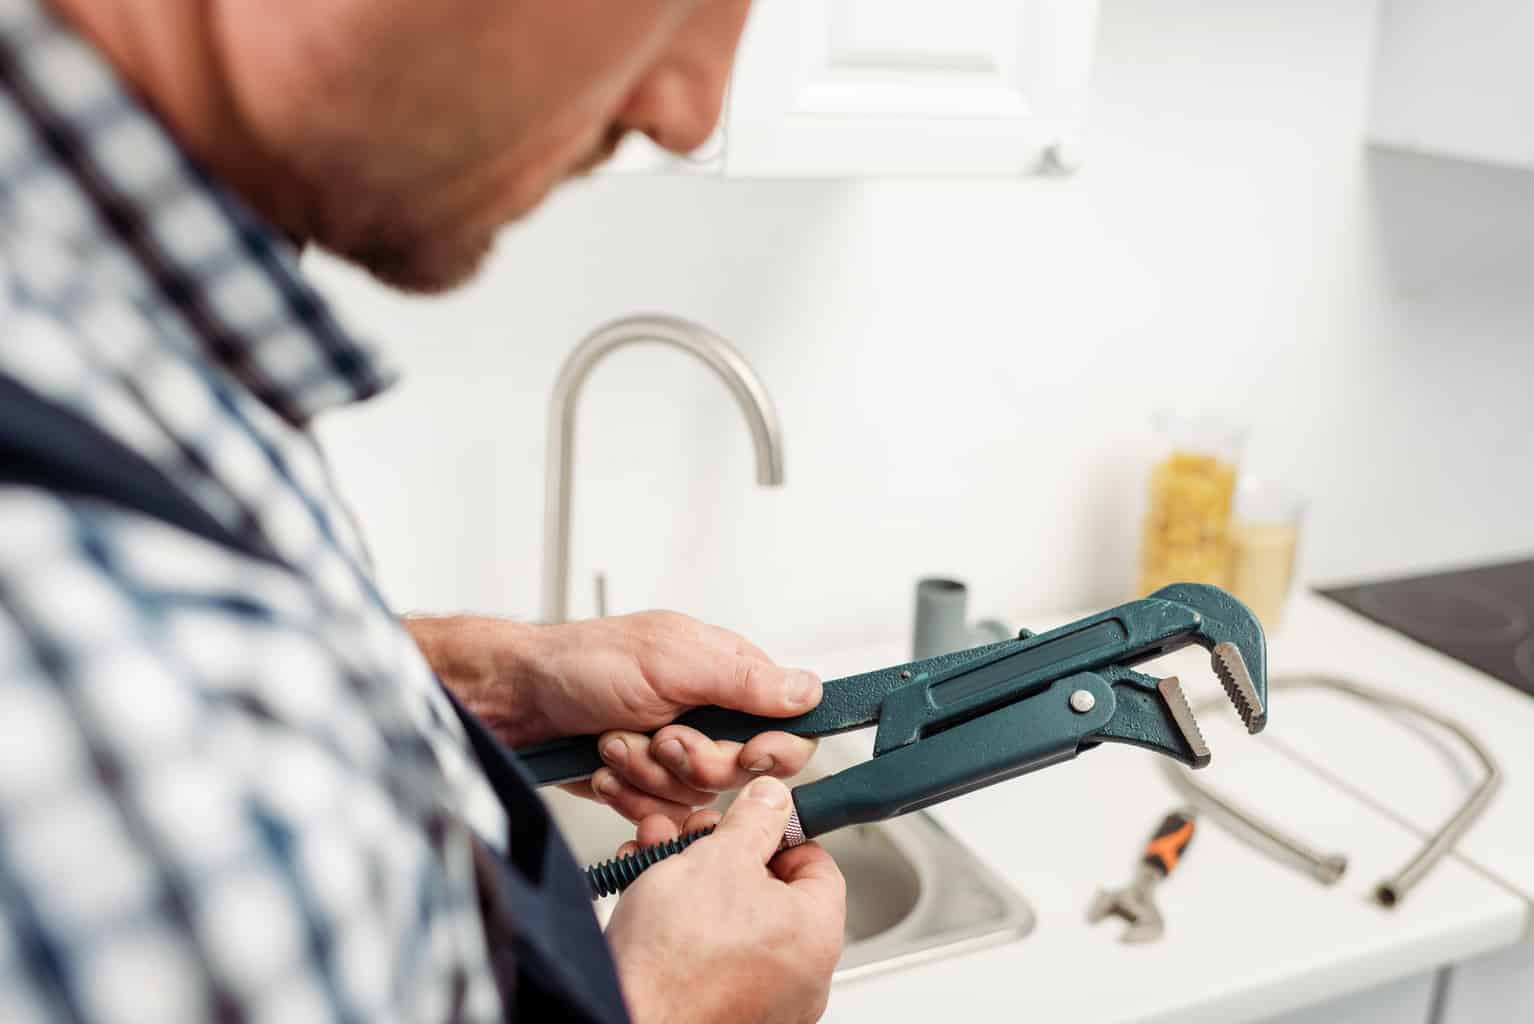 How To Repair Low Pressure In A Kitchen Sink